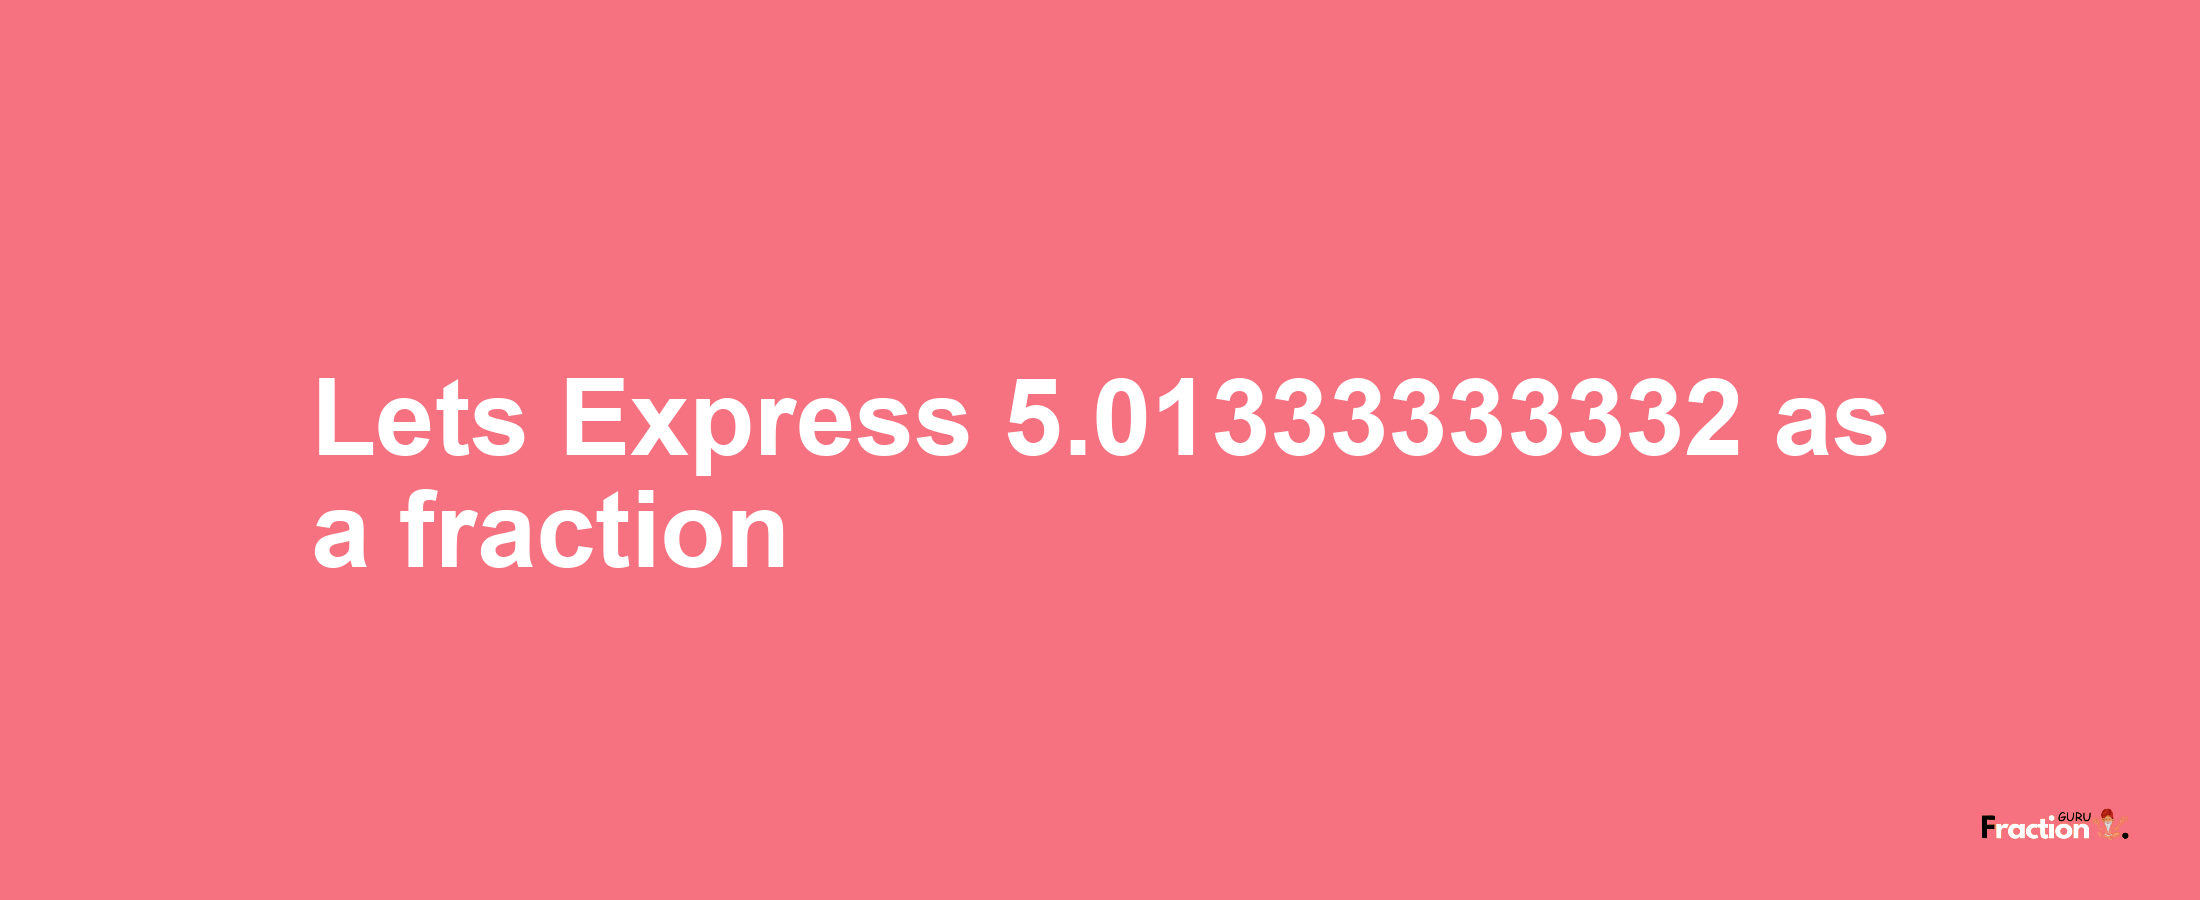 Lets Express 5.01333333332 as afraction